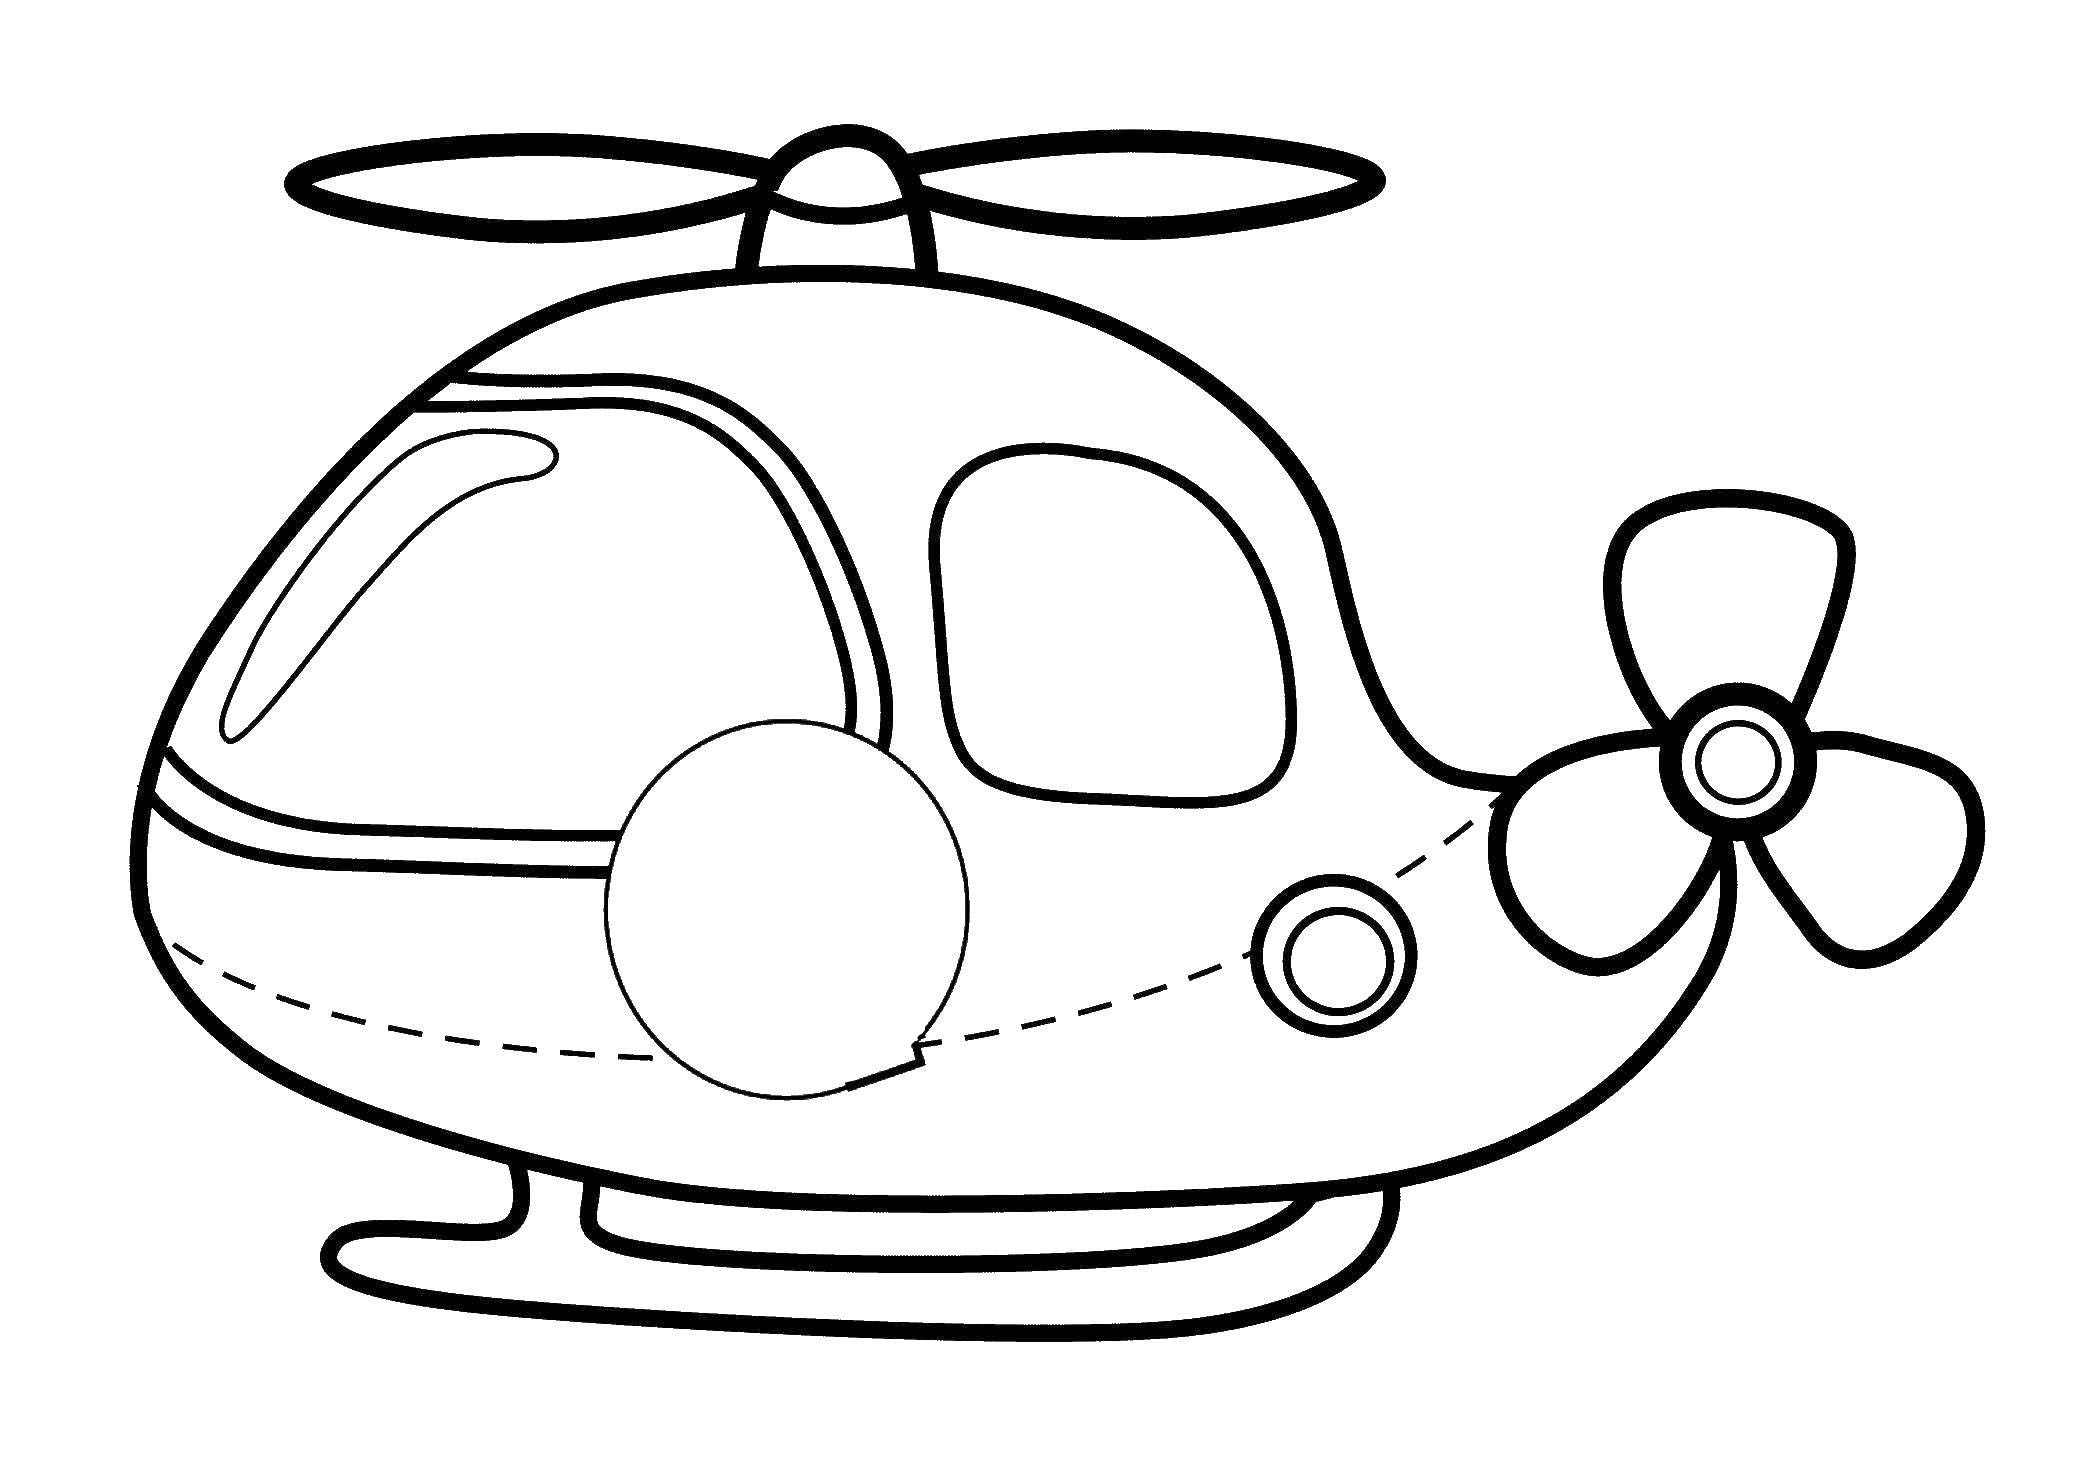 Coloring Helicopter. Category Transport on English. Tags:  Gunship.